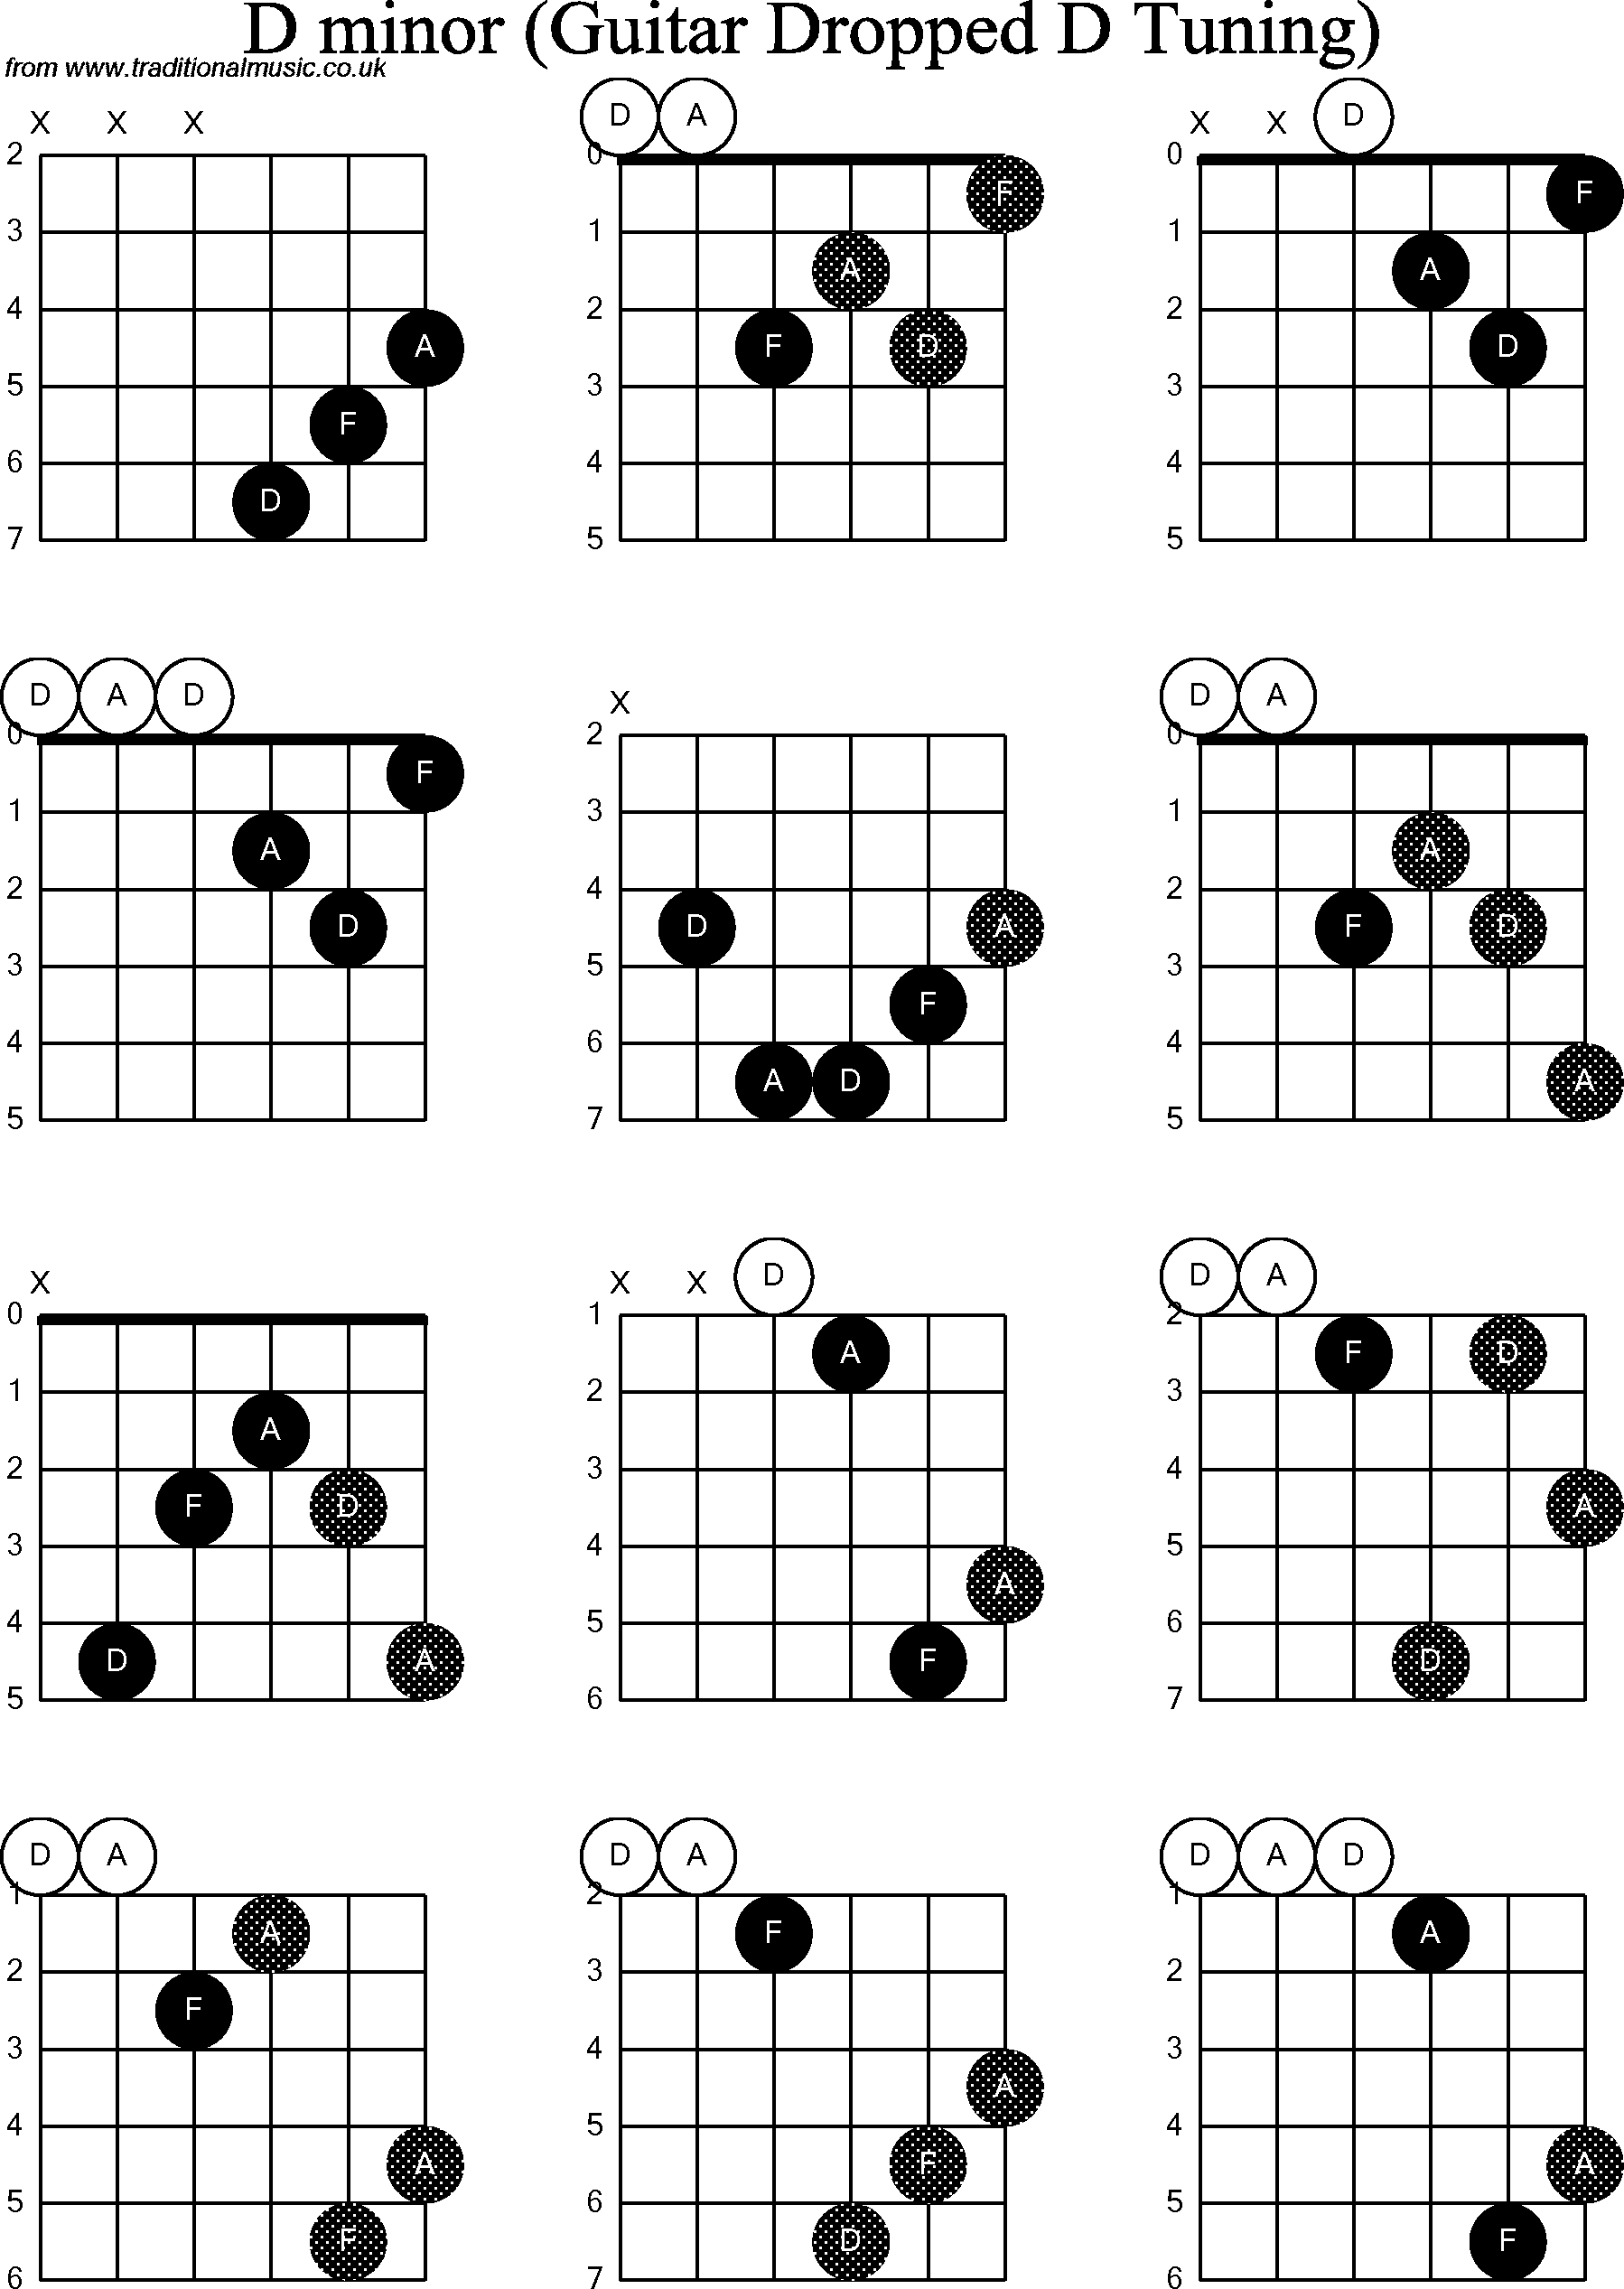 Chord diagrams for dropped D Guitar(DADGBE), D Minor